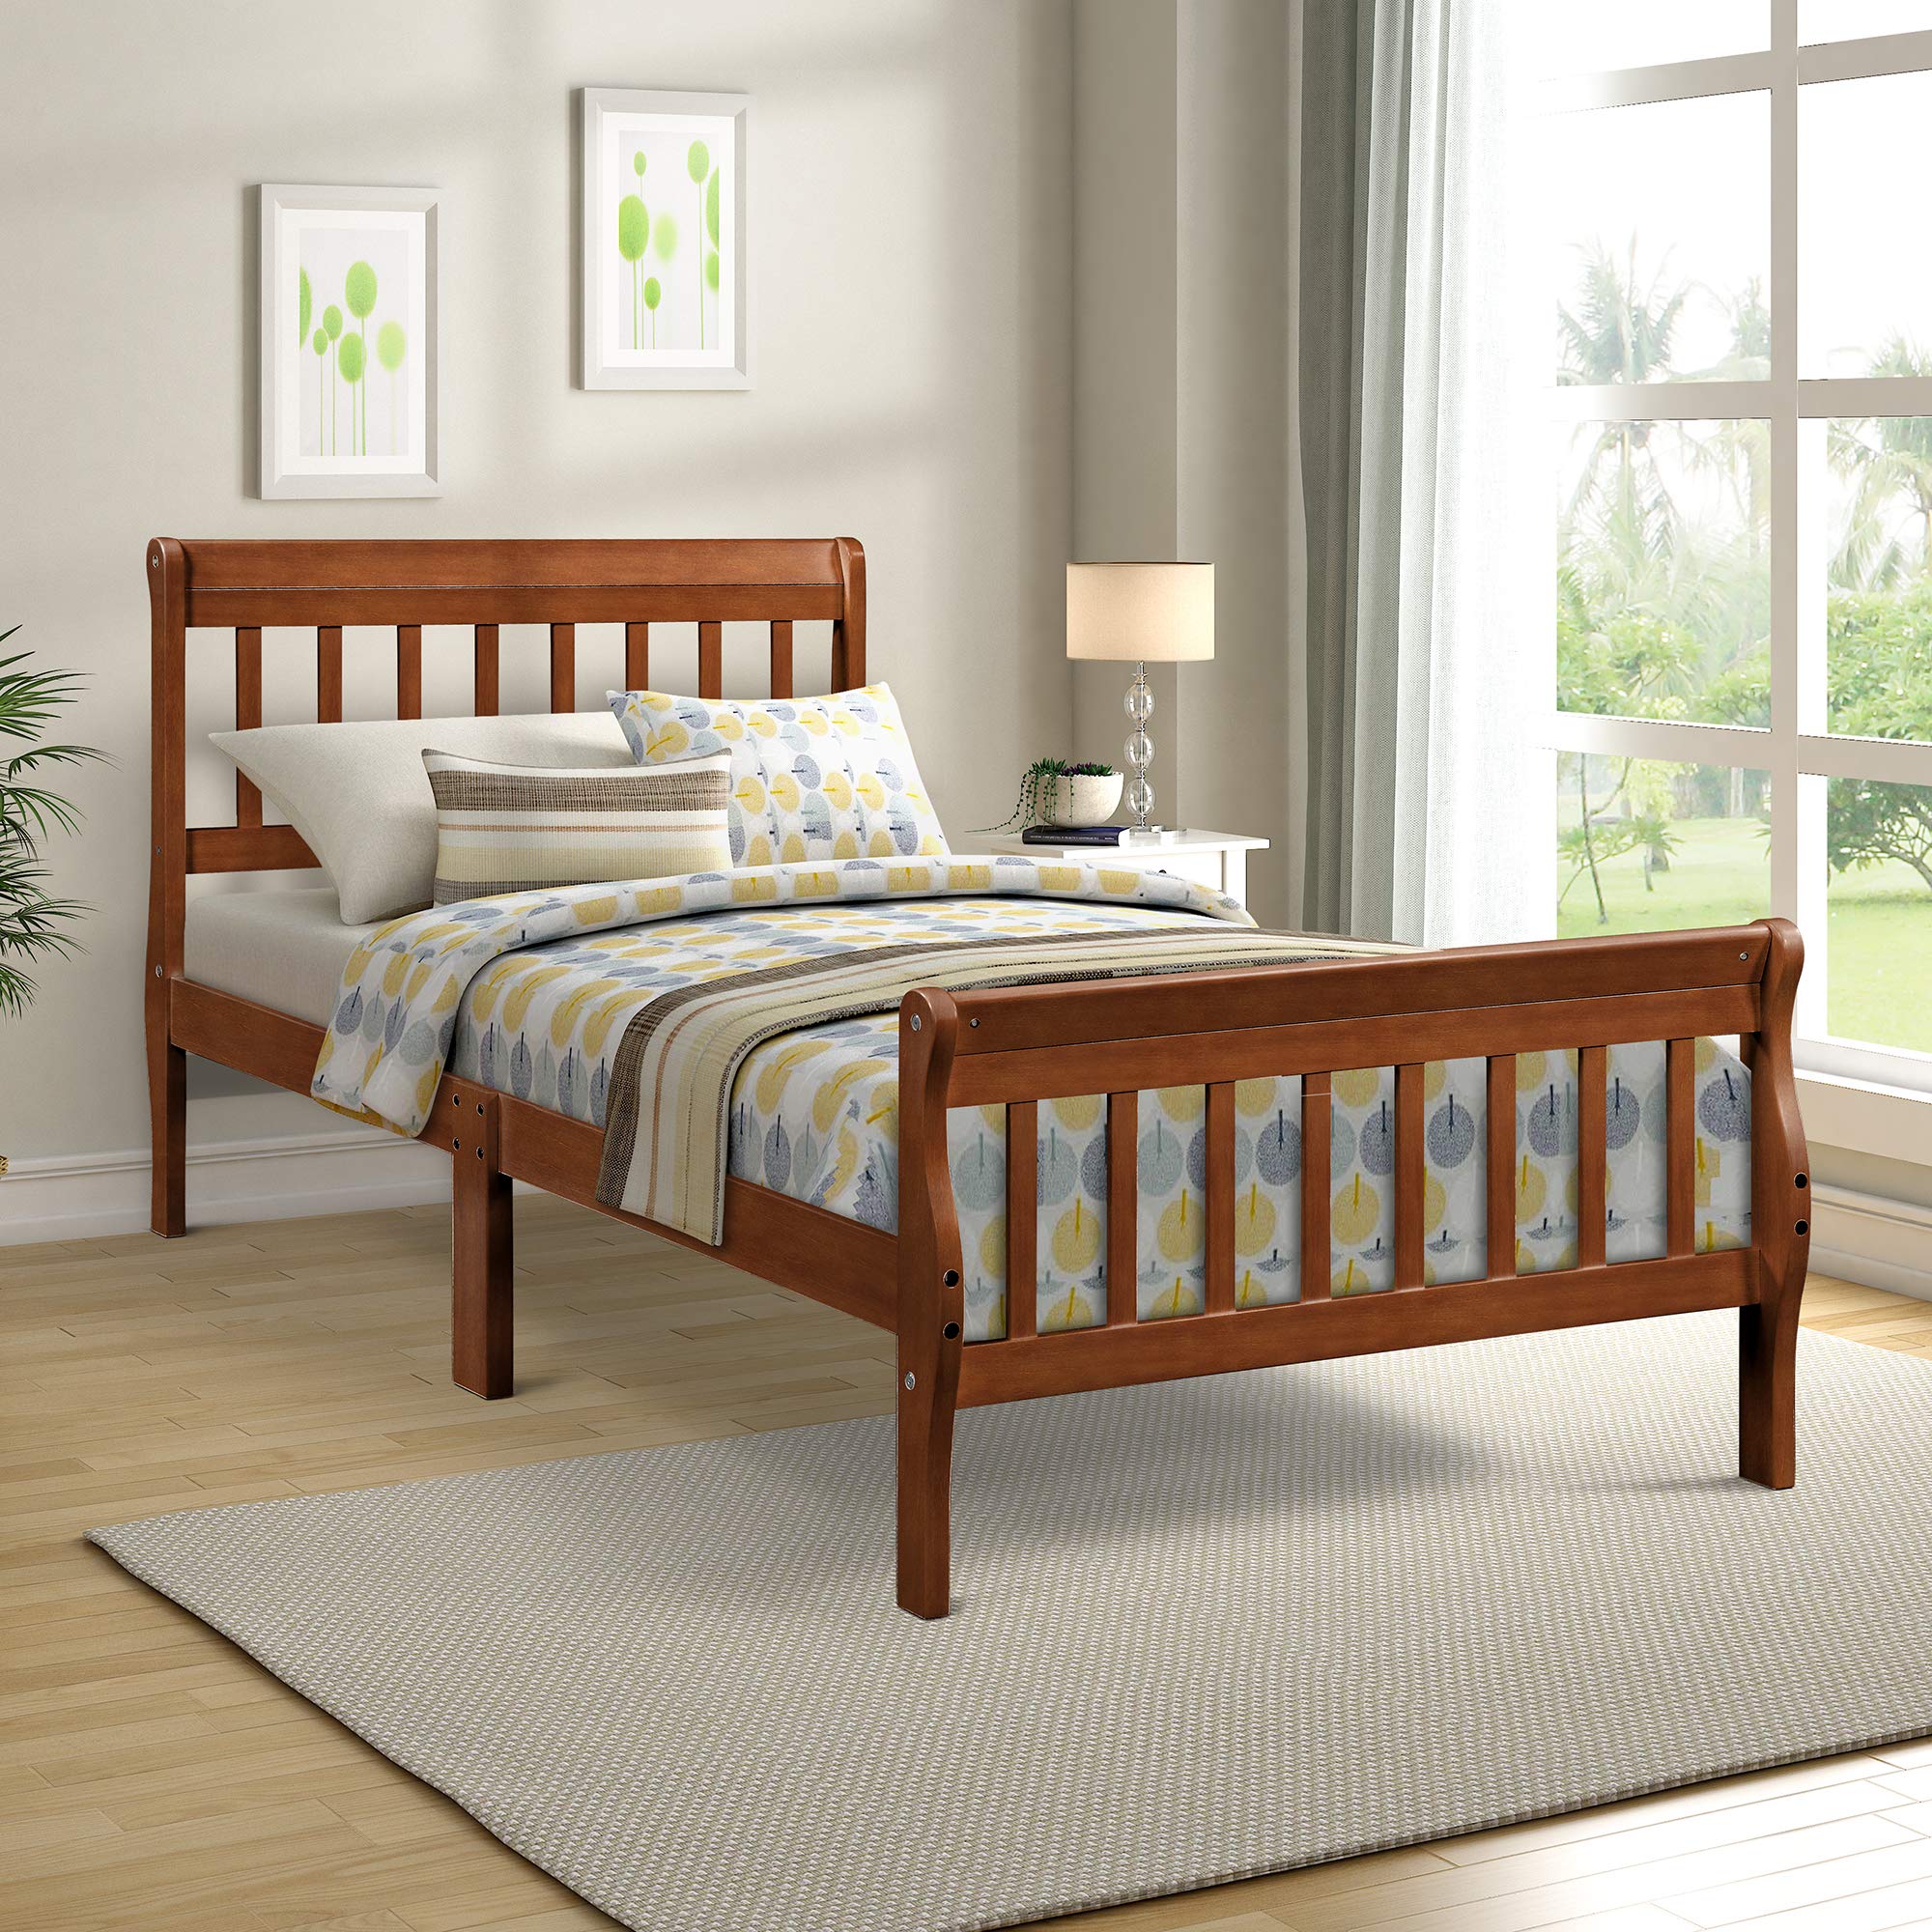 Voohek Twin Size Platform Bed Frame with Headboard, Footboard and Wood Slat Support, Sleigh Beds with Extra Supporting Legs, No 